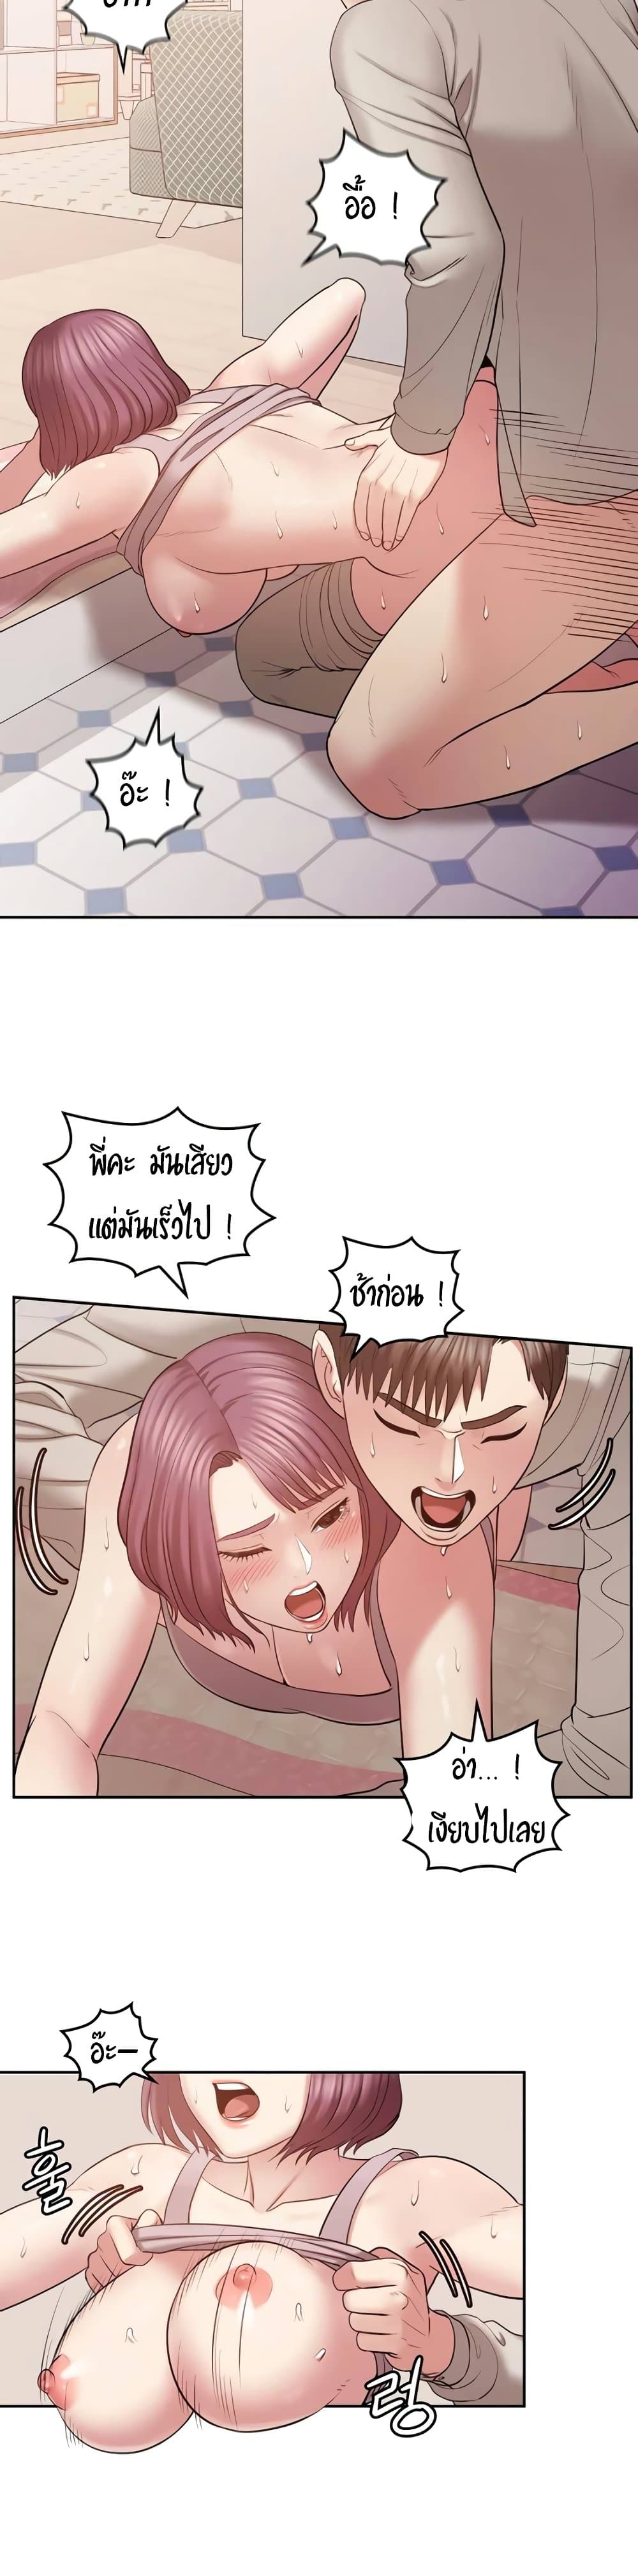 Sexual Consulting 2 ภาพที่ 34